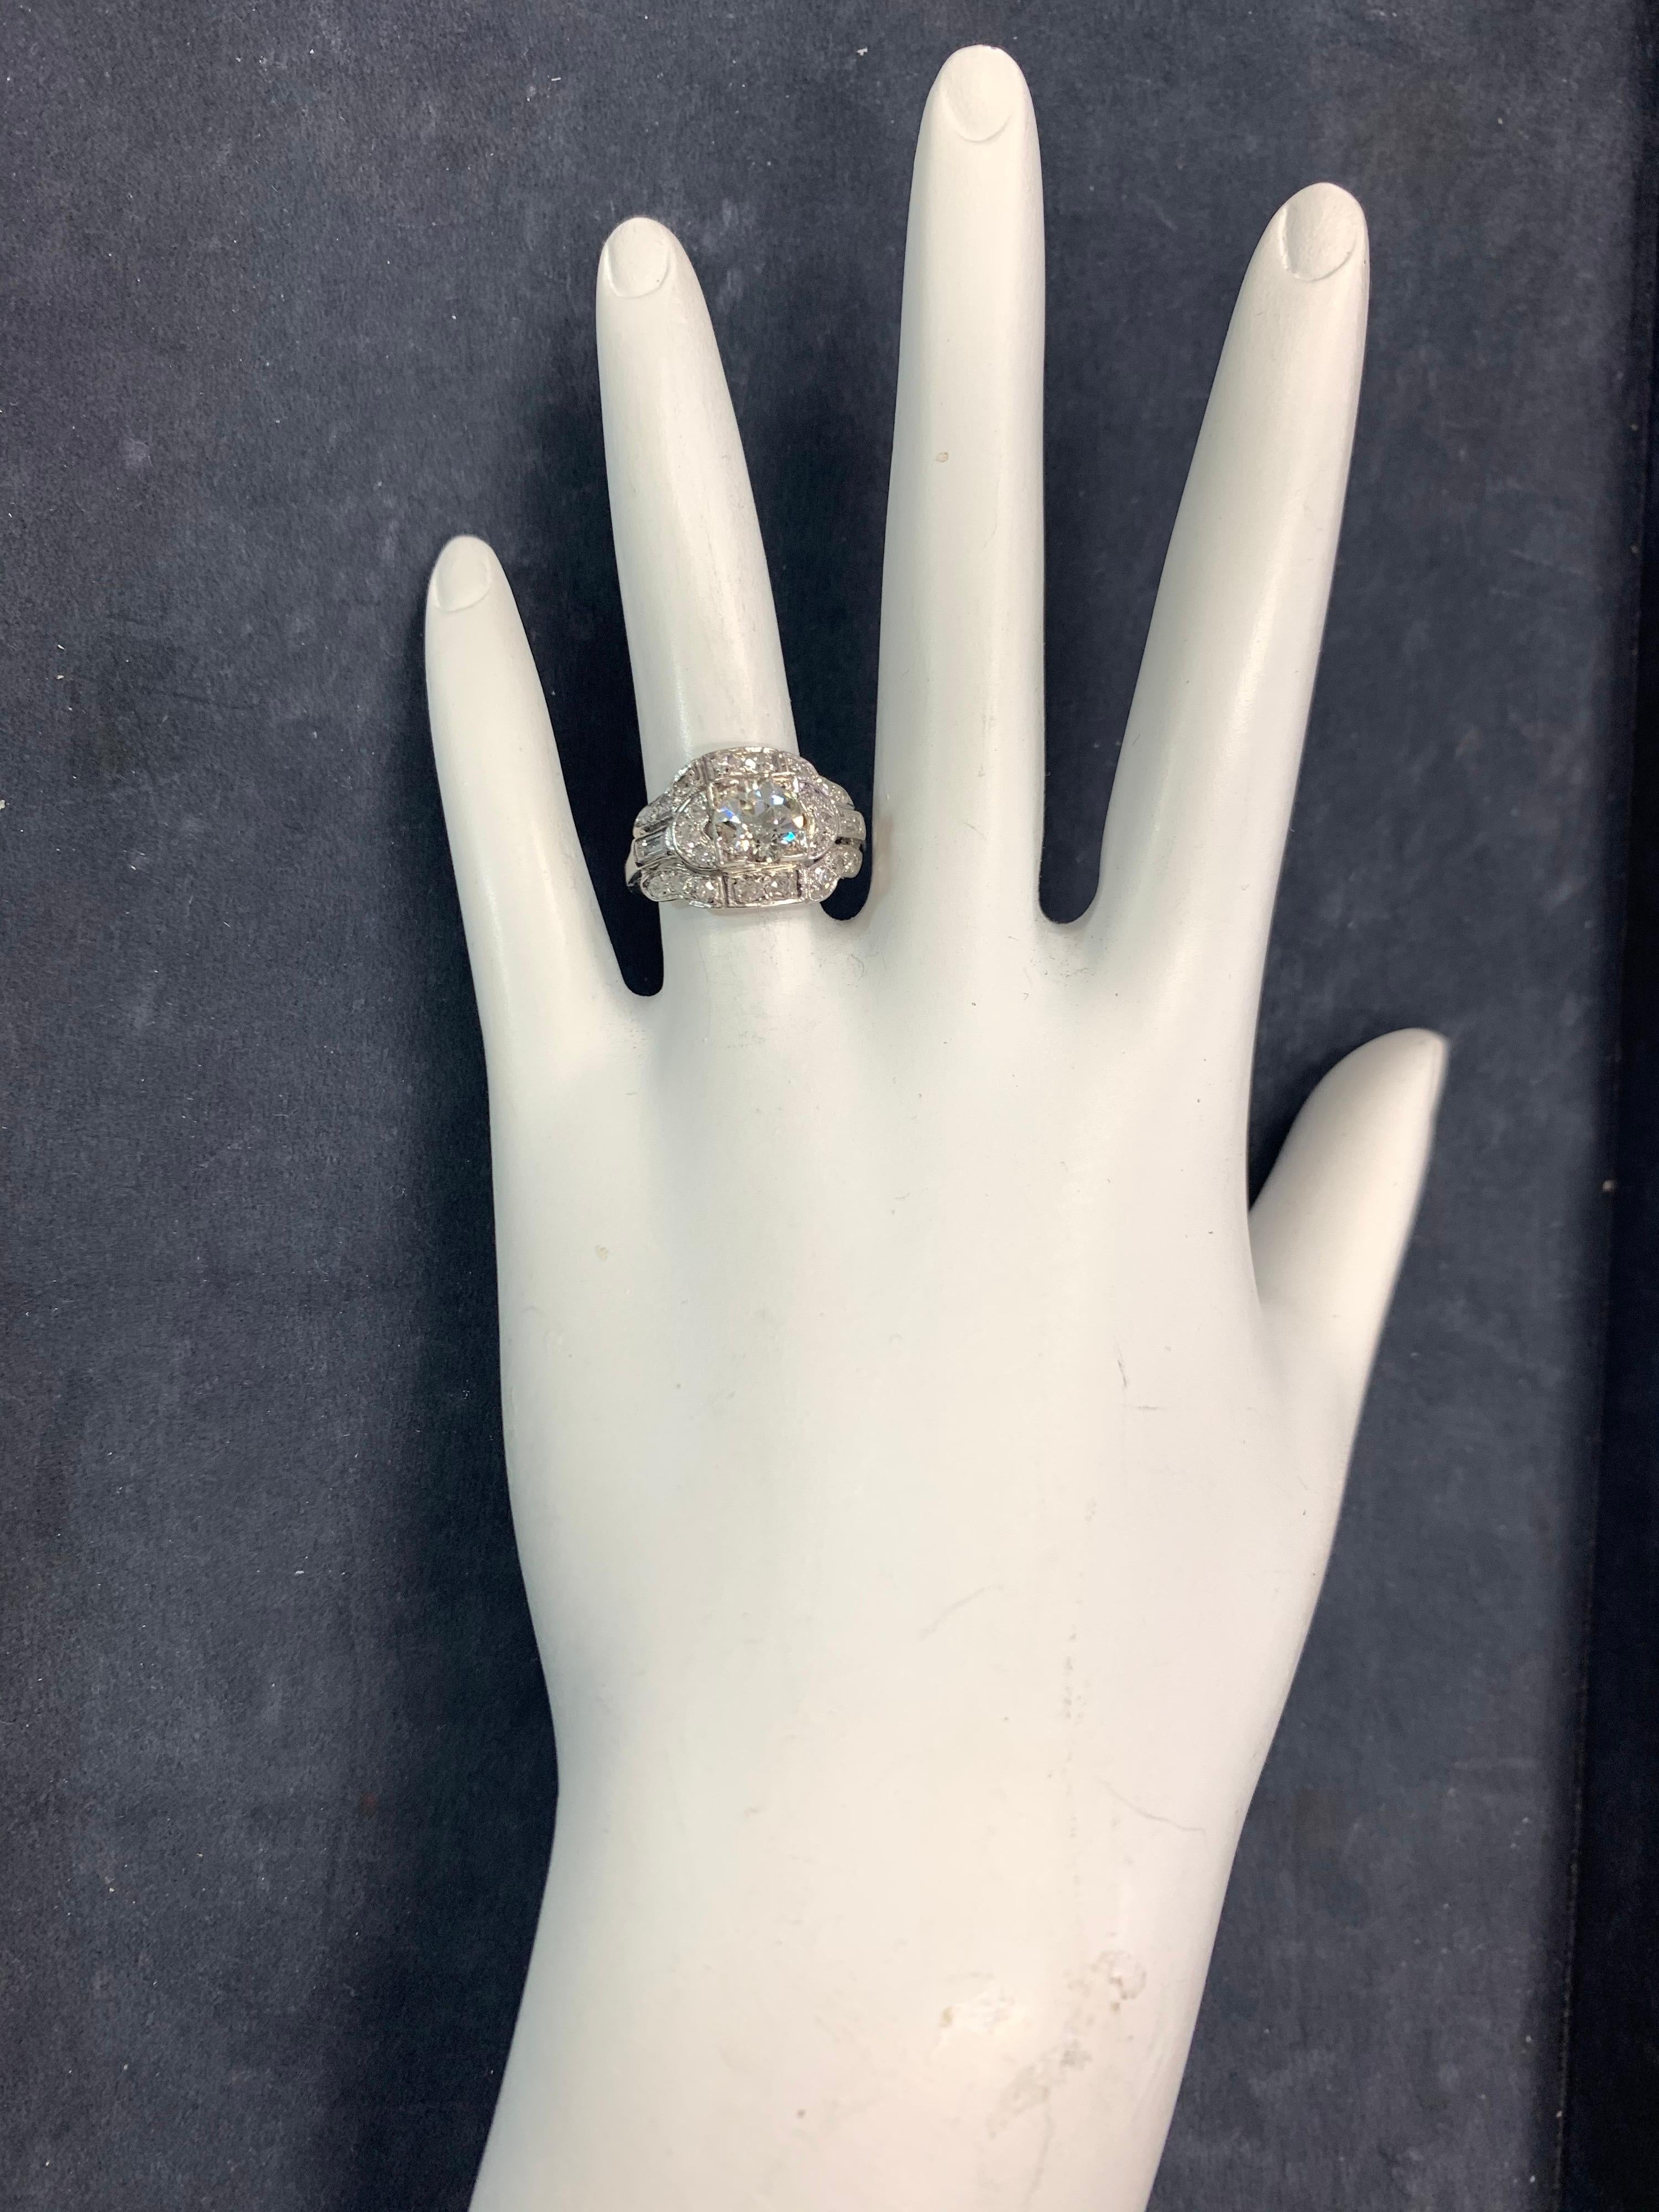 Art Deco Style Natural Diamond Ring set in 14k White Gold, size 6.25. 

The center stone is an approximate 0.95 carat Old European Cut Natural Diamond 6.4x4mm, H-I color and I clarity. 

Set on the gold mounting are 22 round brilliant diamonds and